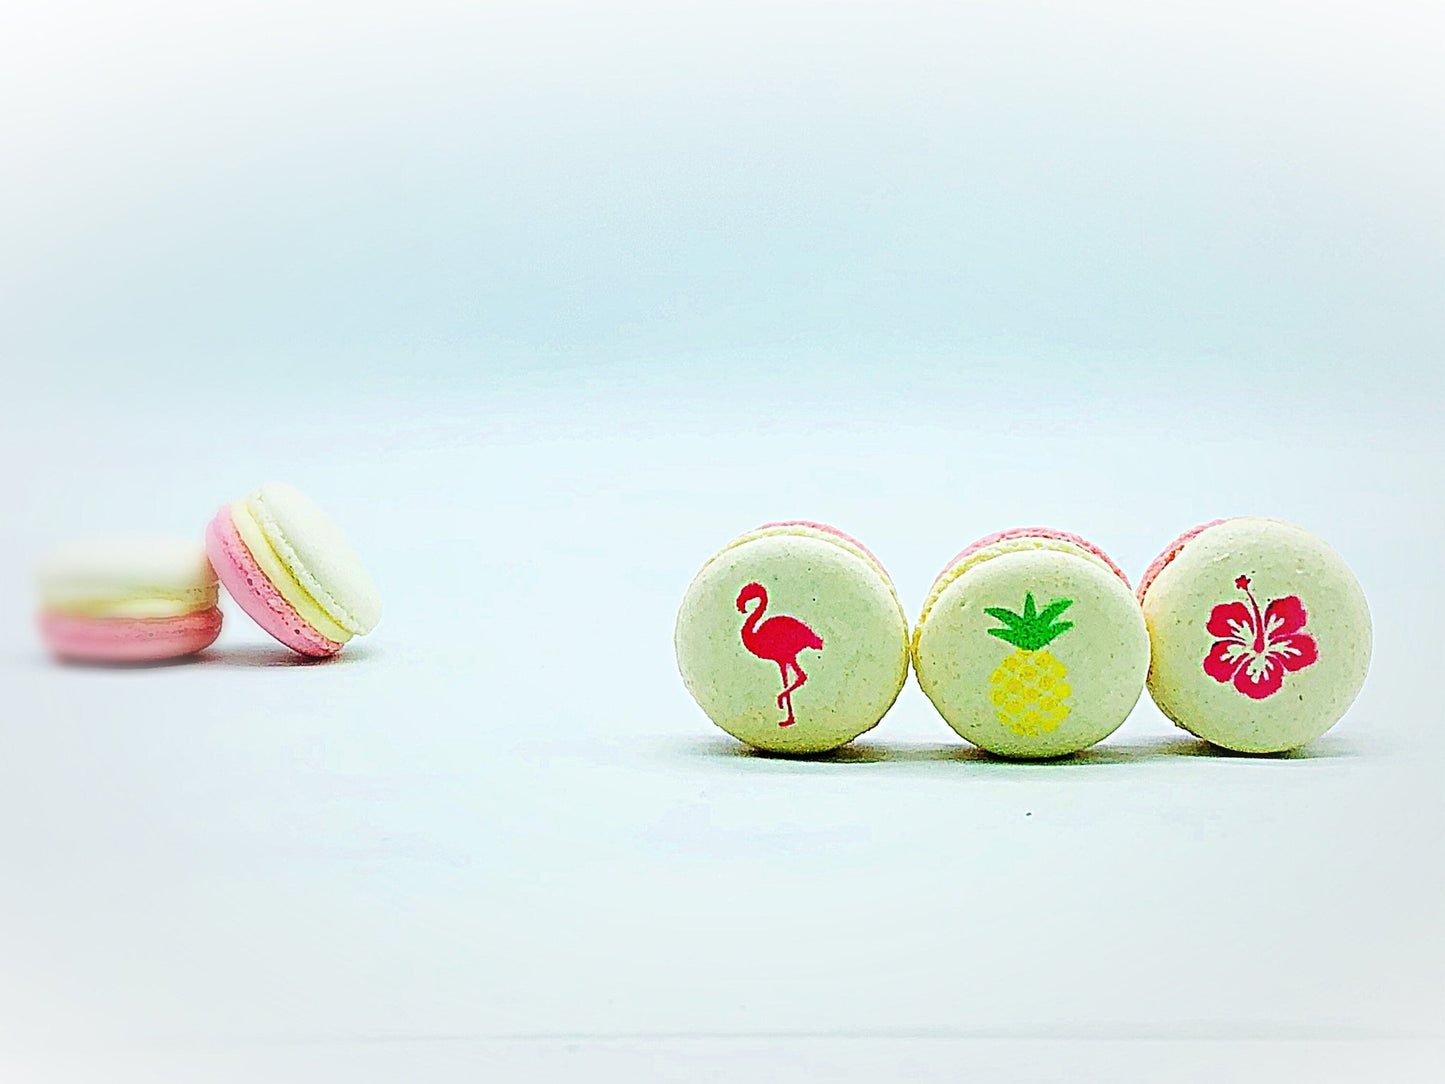 French Macaron Flamingo Luau Set | Available in 6 or 12 Pack - Macaron Centrale6 pack